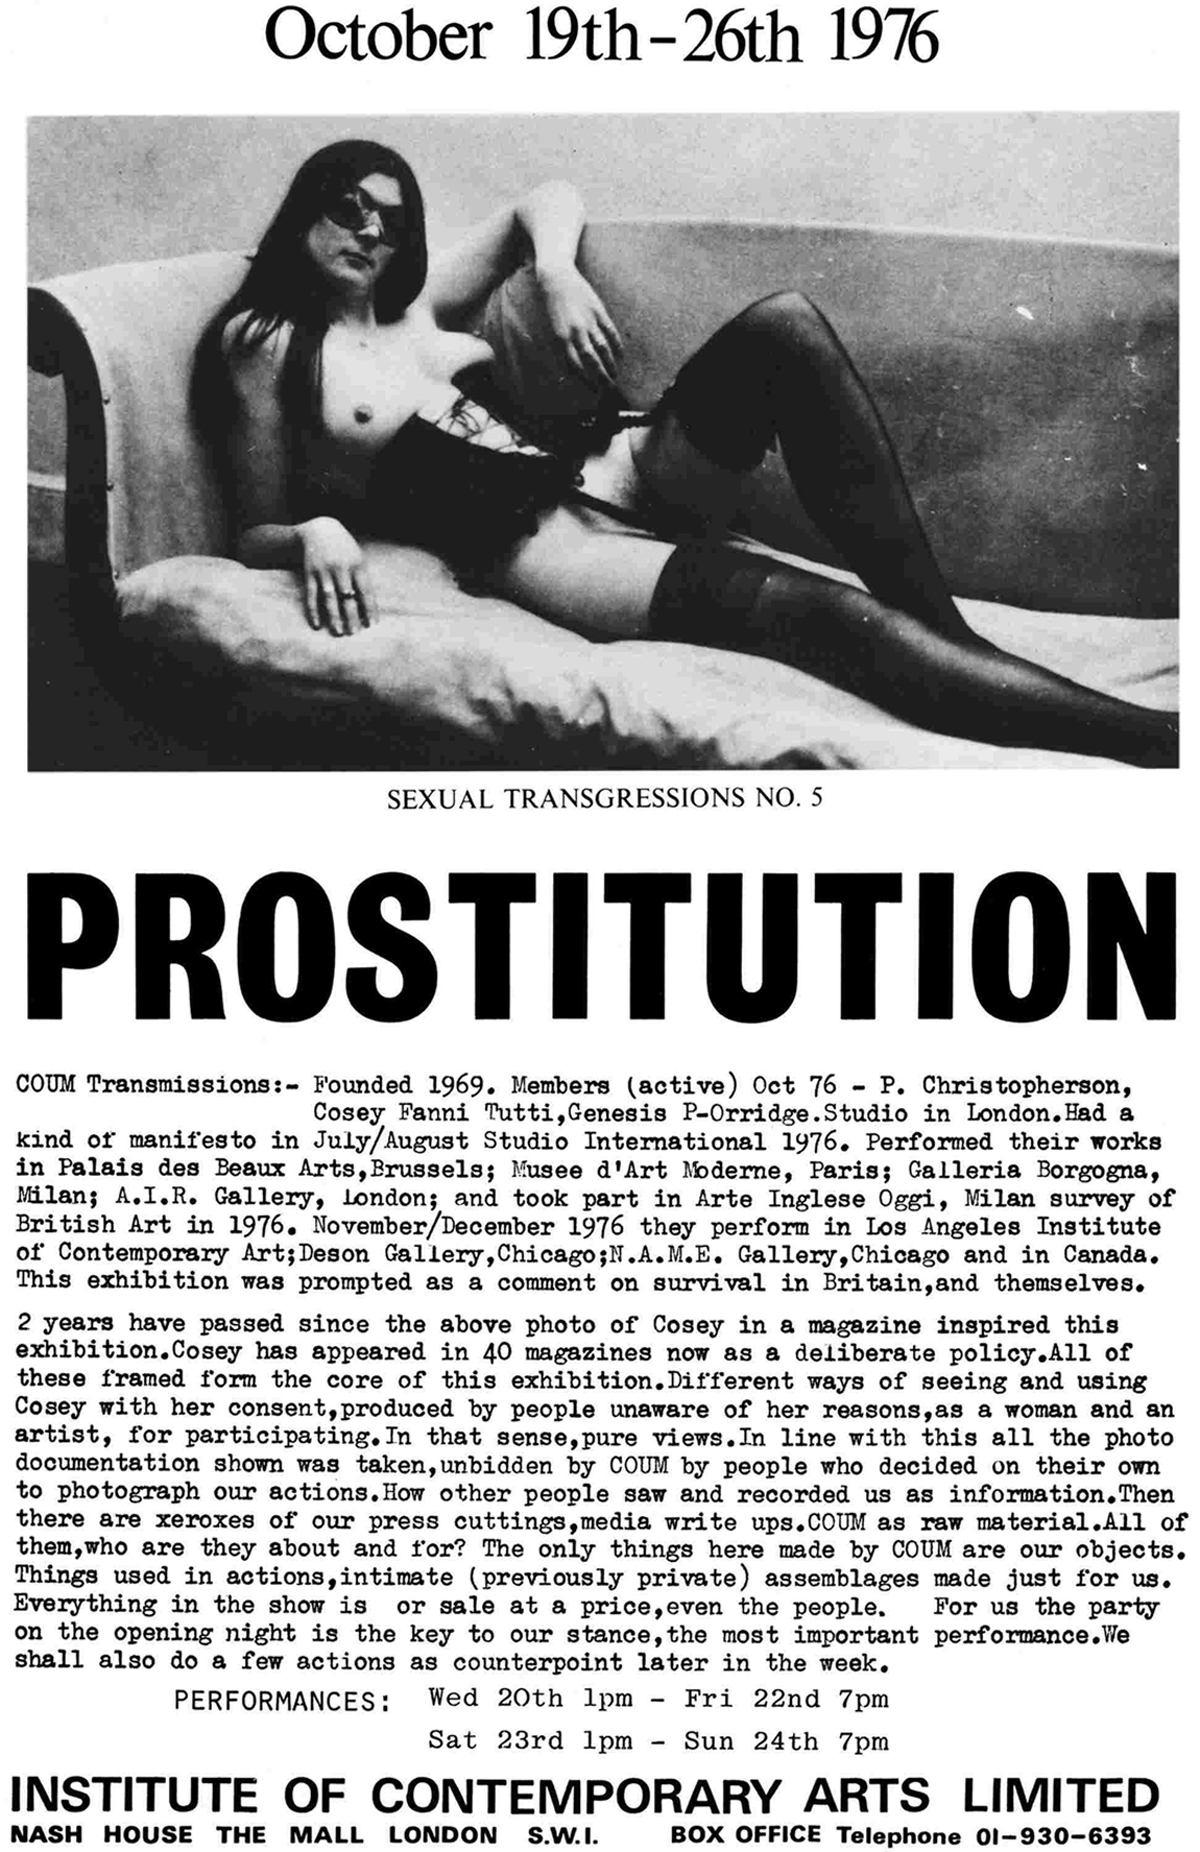 13-coum-tranmissions-prostitution-poster